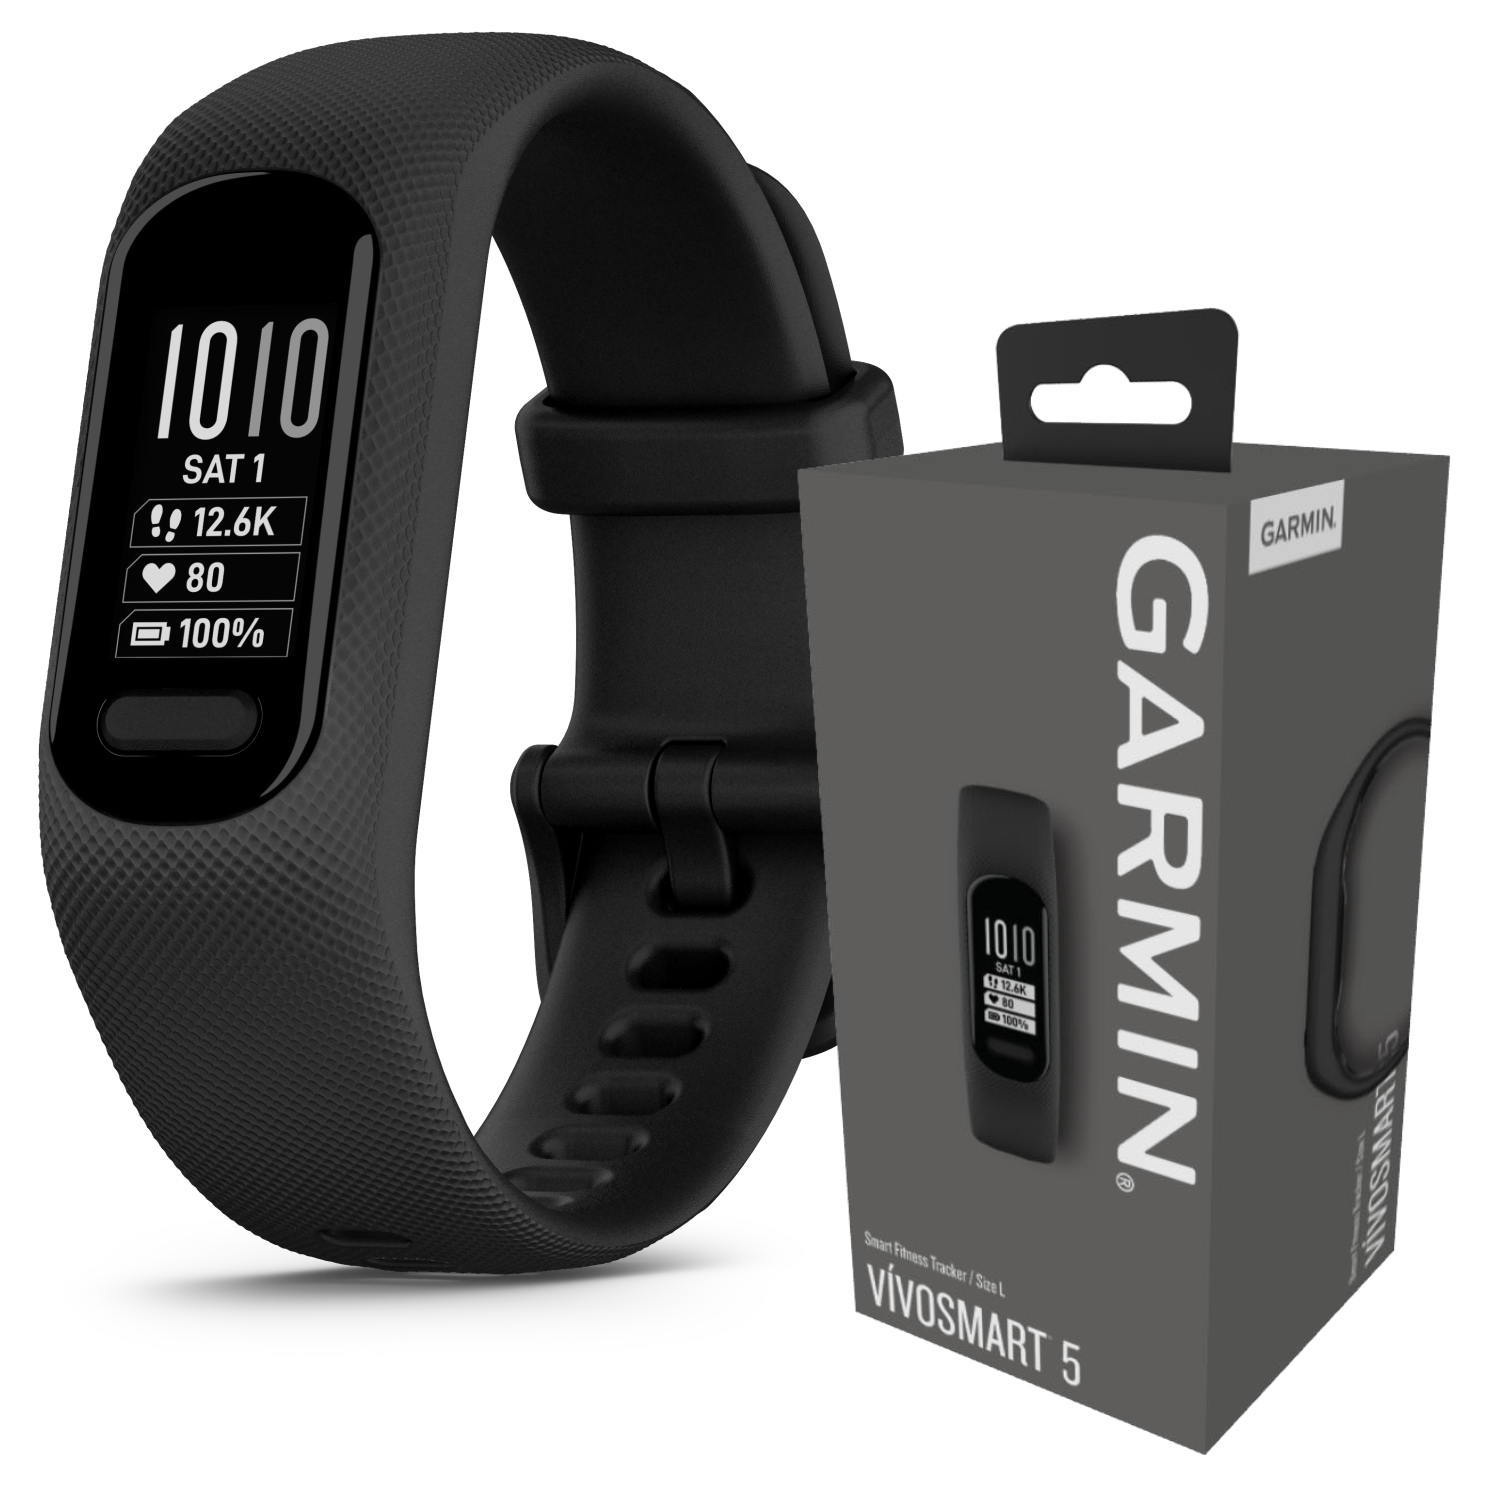 Garmin 5 Smart Fitness and Health Tracker, Black Case with W – Sports Gadgets